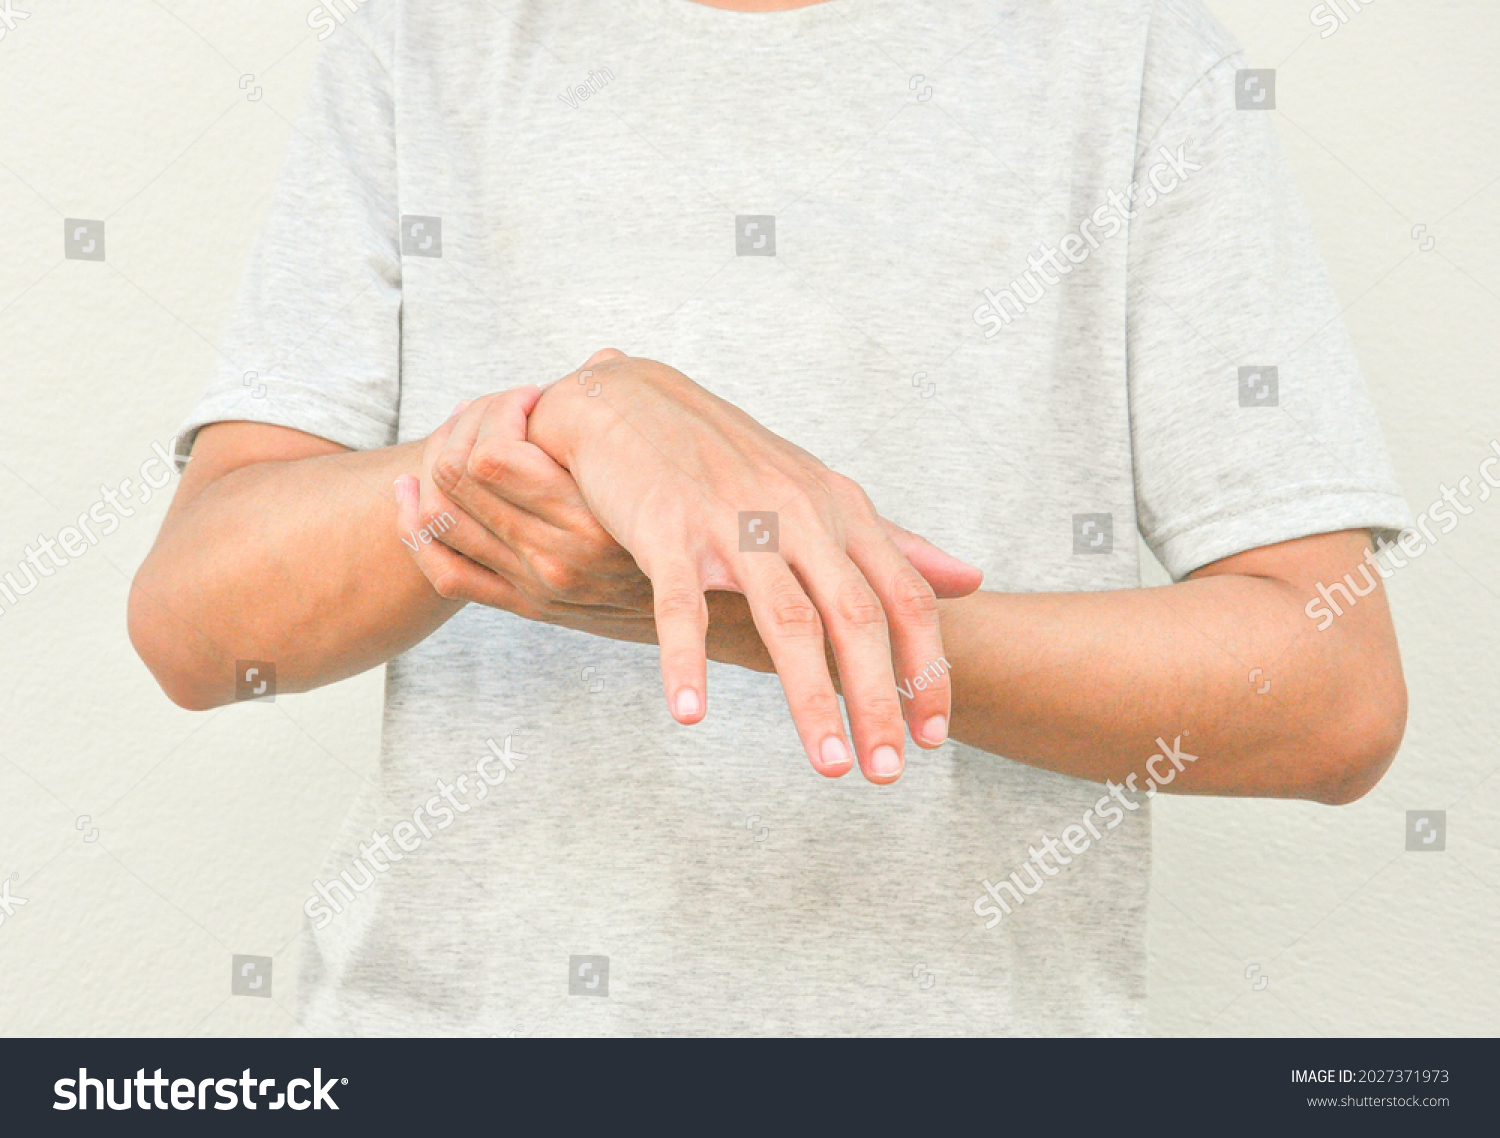 a man support his hand and arm that having symptoms of pain,numbness,weakness,paralysis,muscle disorder, concept of Guillain barre syndrome caused by autoimmune disorder #2027371973